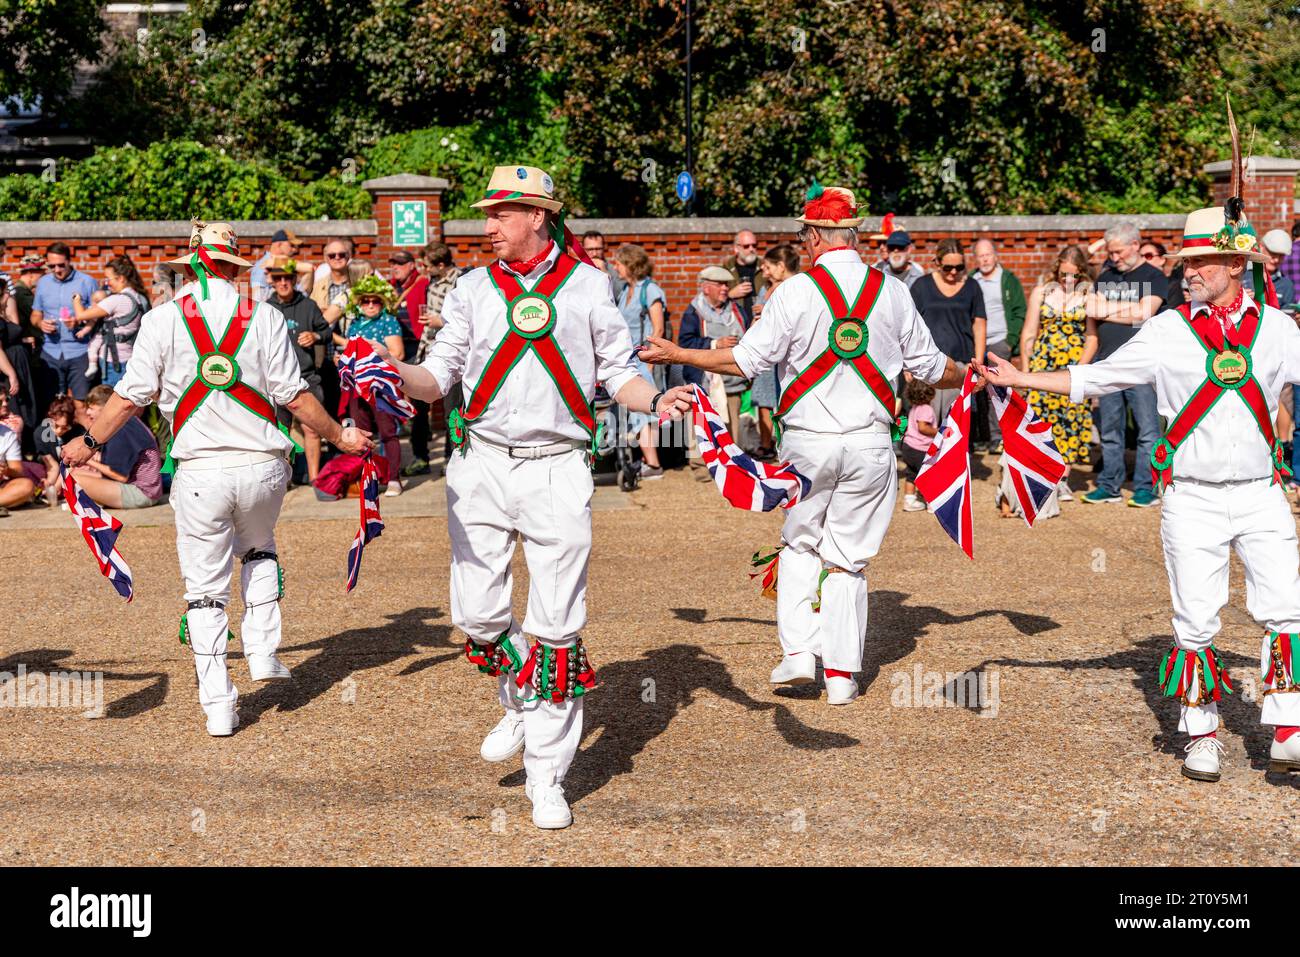 Chanctonbury Ring Morris Men Dancing At The Annual 'Dancing In The Old' Event, Lewes, East Sussex, UK Stock Photo